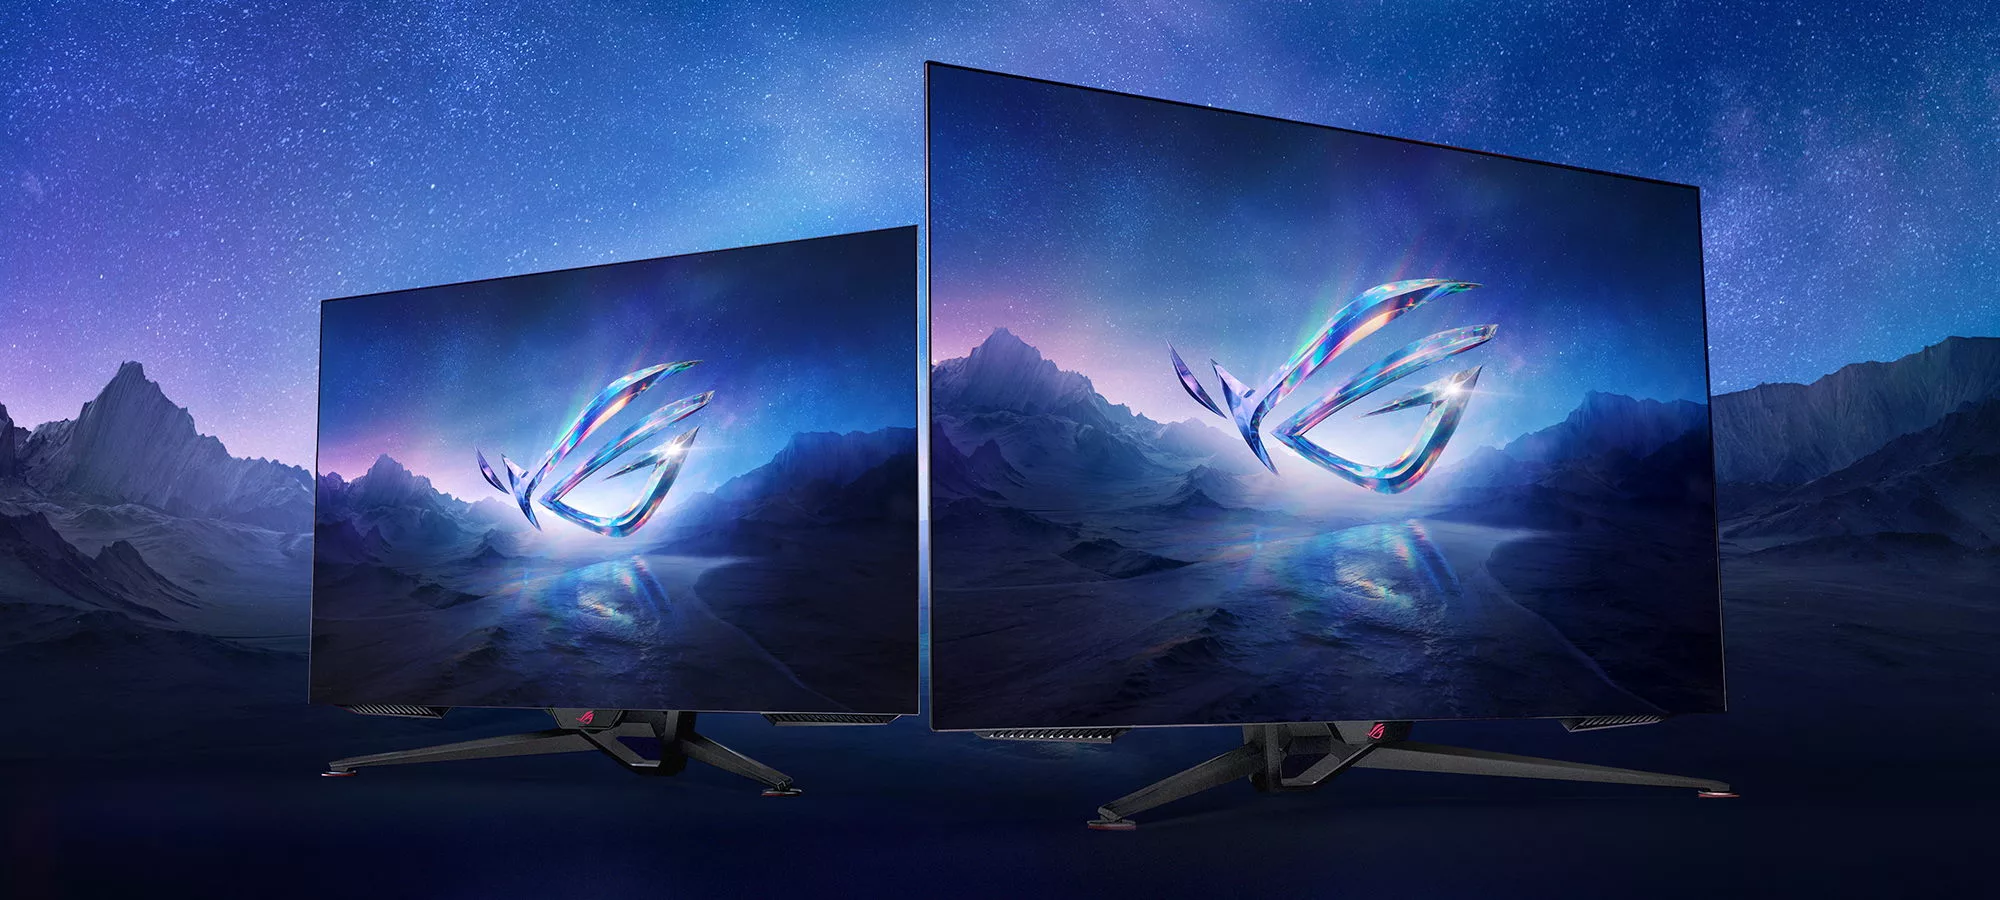 Two ROG OLED monitors with mountains and stars in the background.